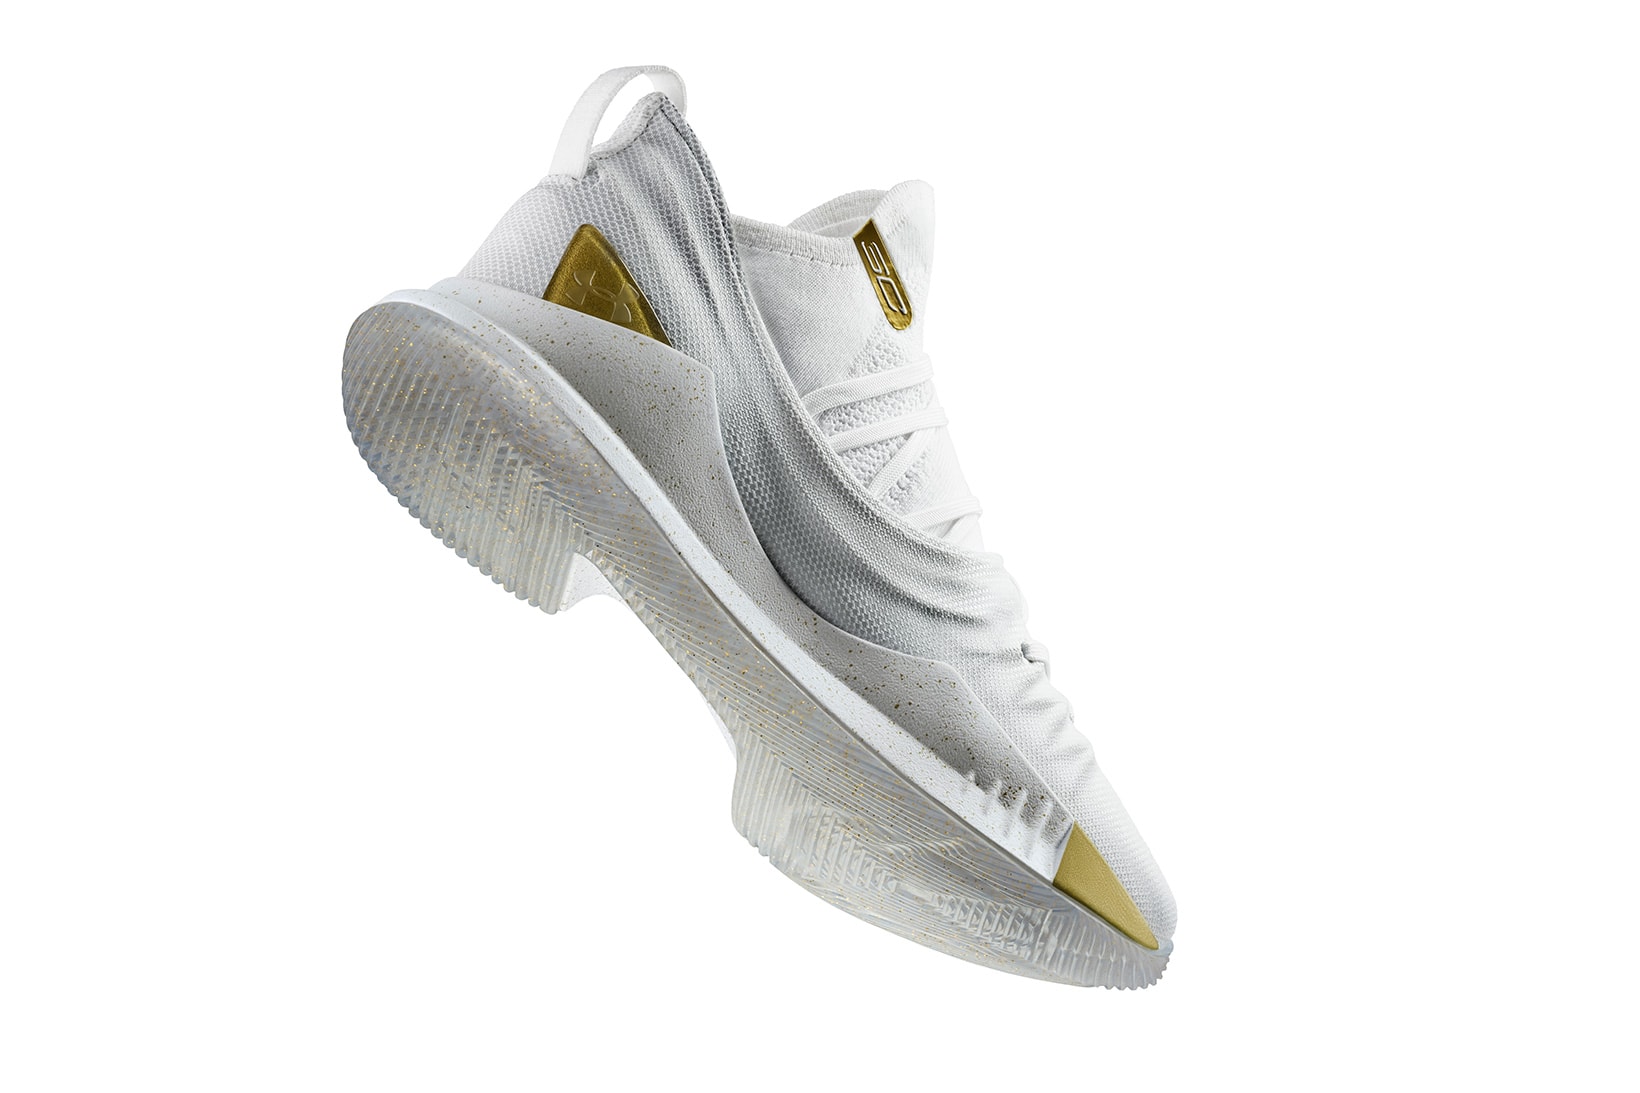 Under Armour Curry 5 Takeover Edition Release Date black gold white gold 2018 june footwear steph curry stephen curry golden state warriors nba